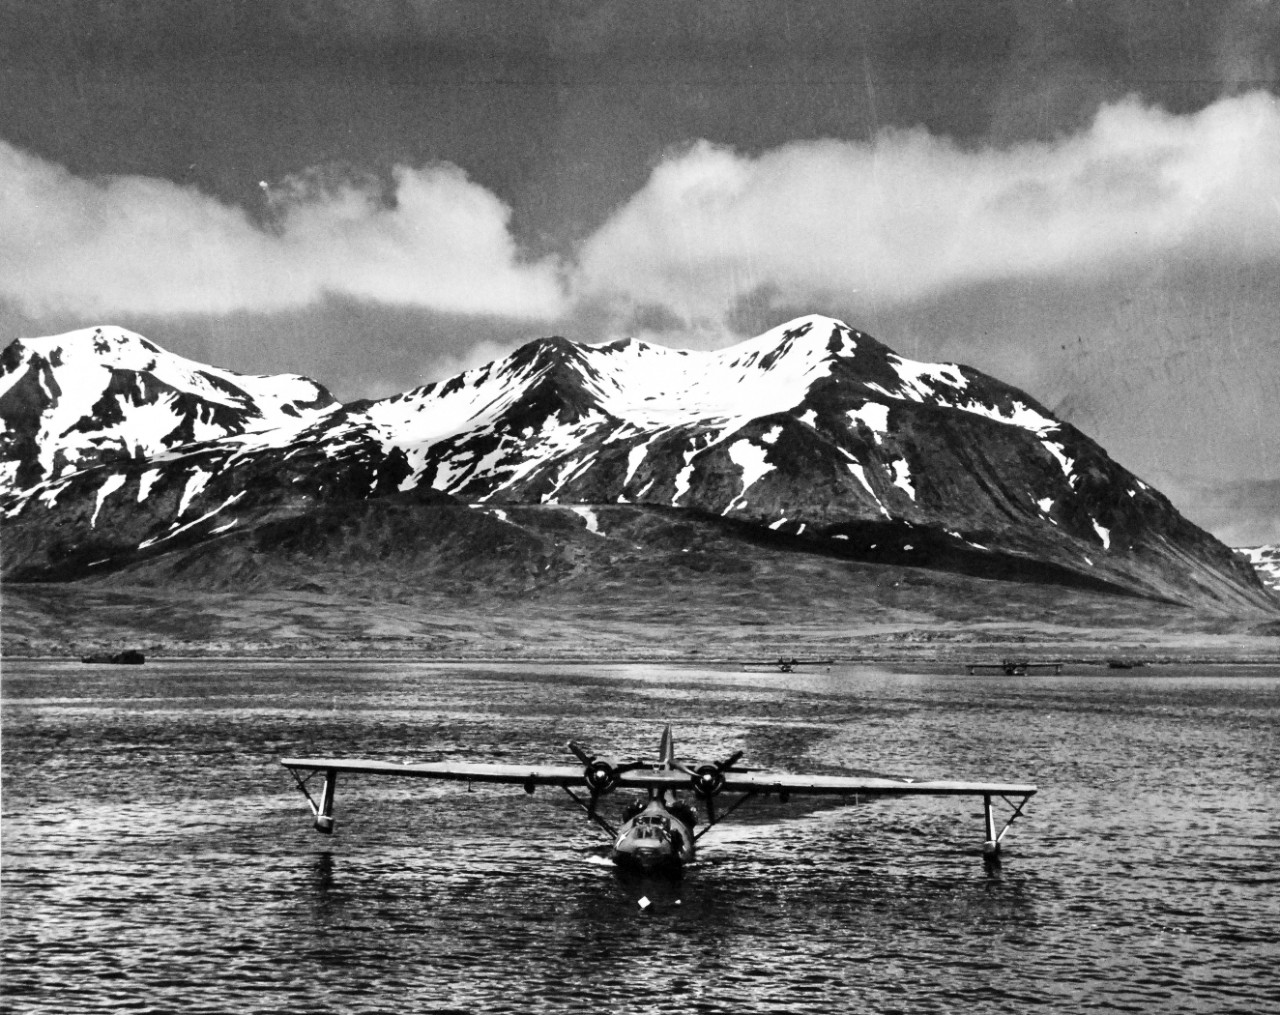 80-G-475733:   PBY-5 “Catalina” patrol bomber, July 1943.   PBY-5 anchored near seaplane tender in Attu Harbor in Aleutians  Photographed by Lieutenant Horace Bristol, July 1943.  TR-5224.   U.S. Navy photograph, now in the collections of the National Archives.  (2015/11/17).